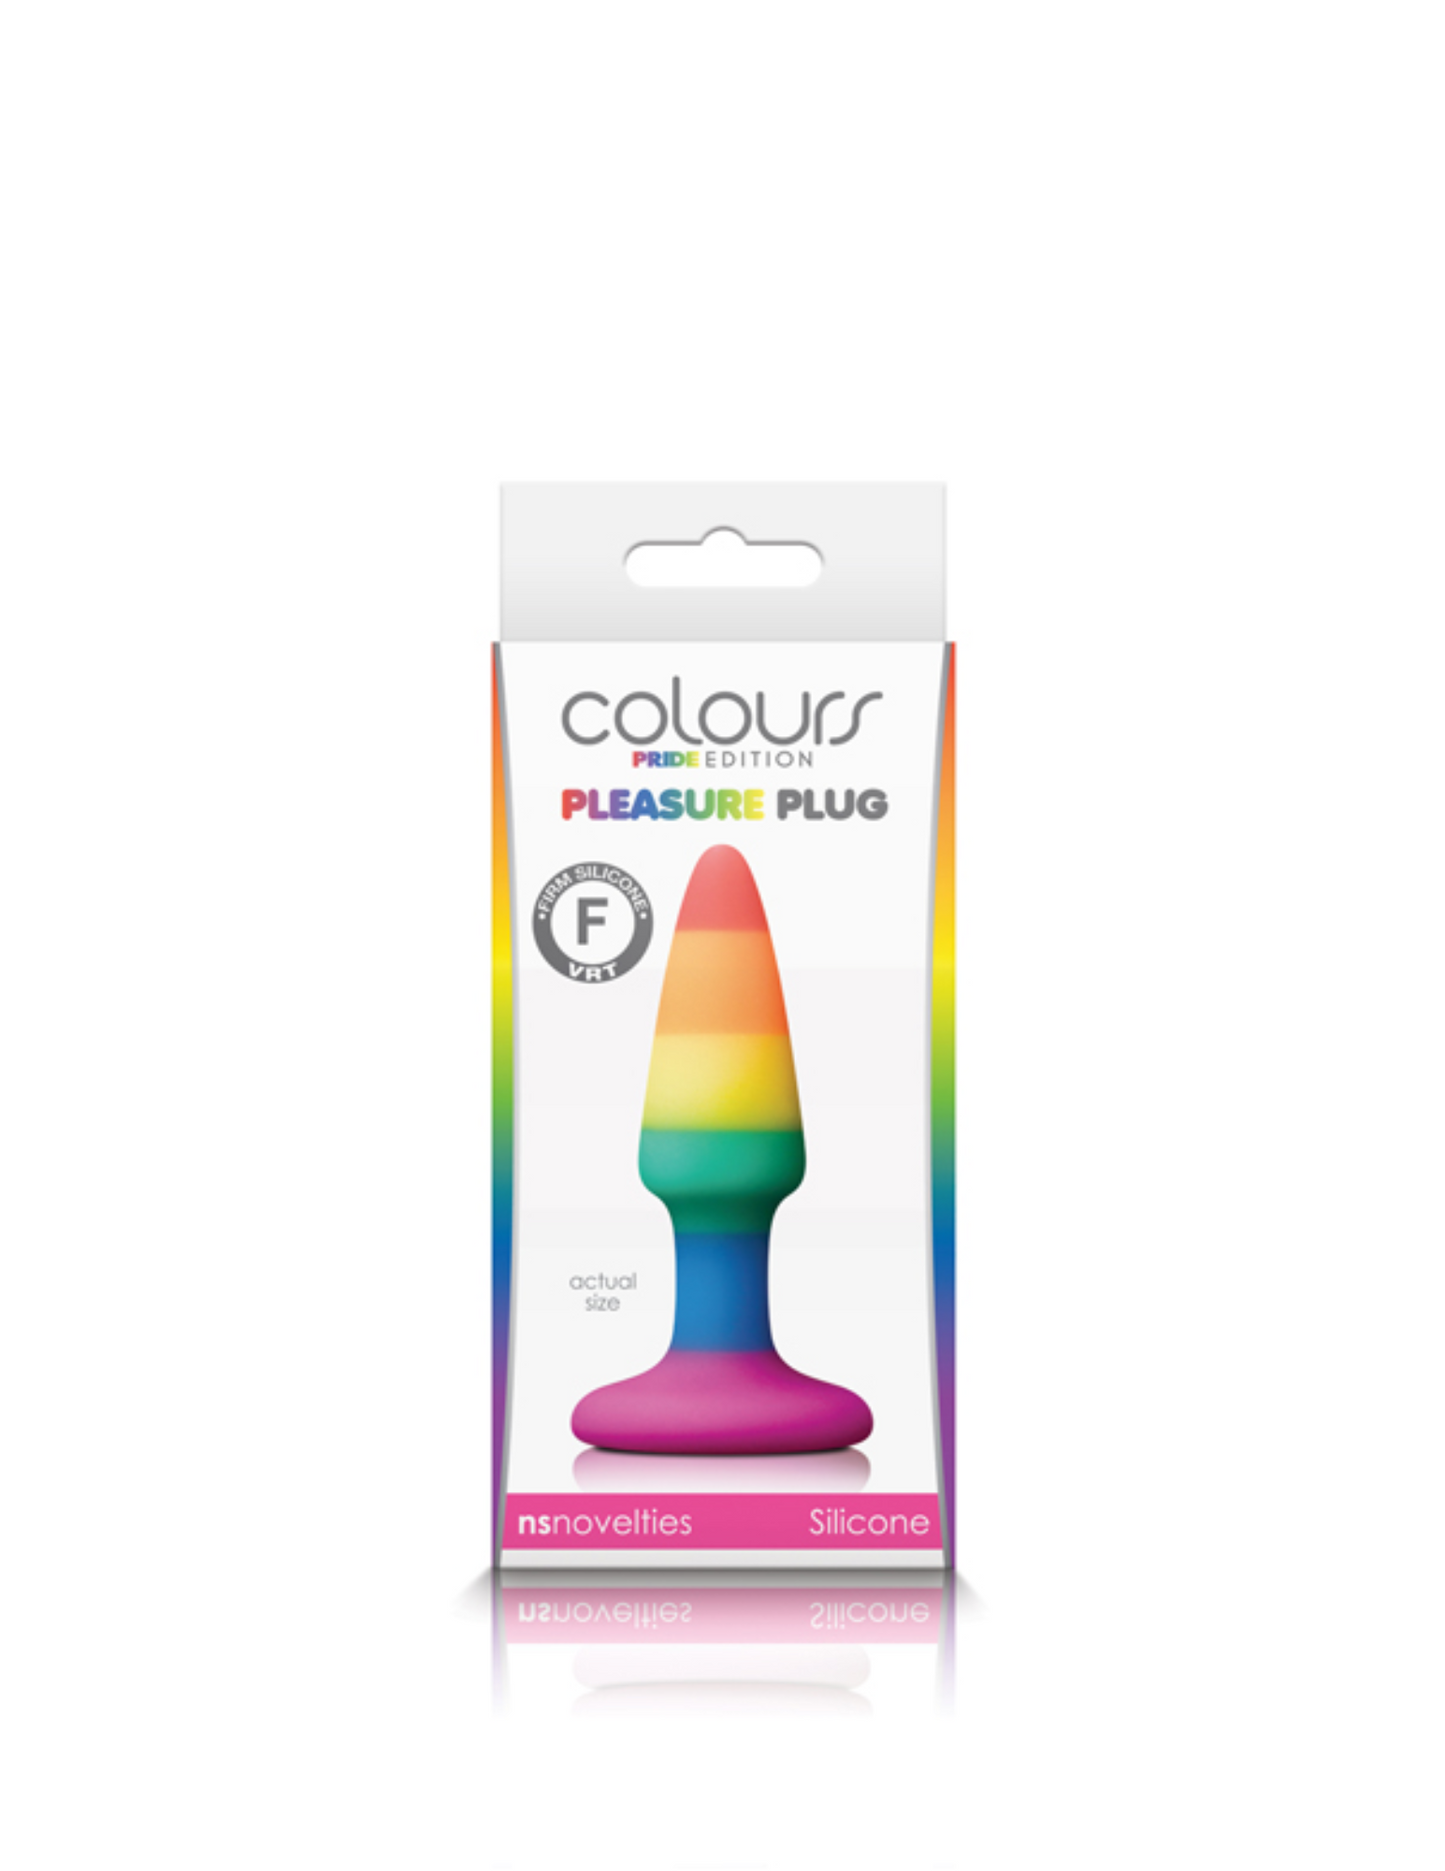 Photo of the front of the box for the Colours Pleasure Plug Mini from NS Novelties (rainbow).